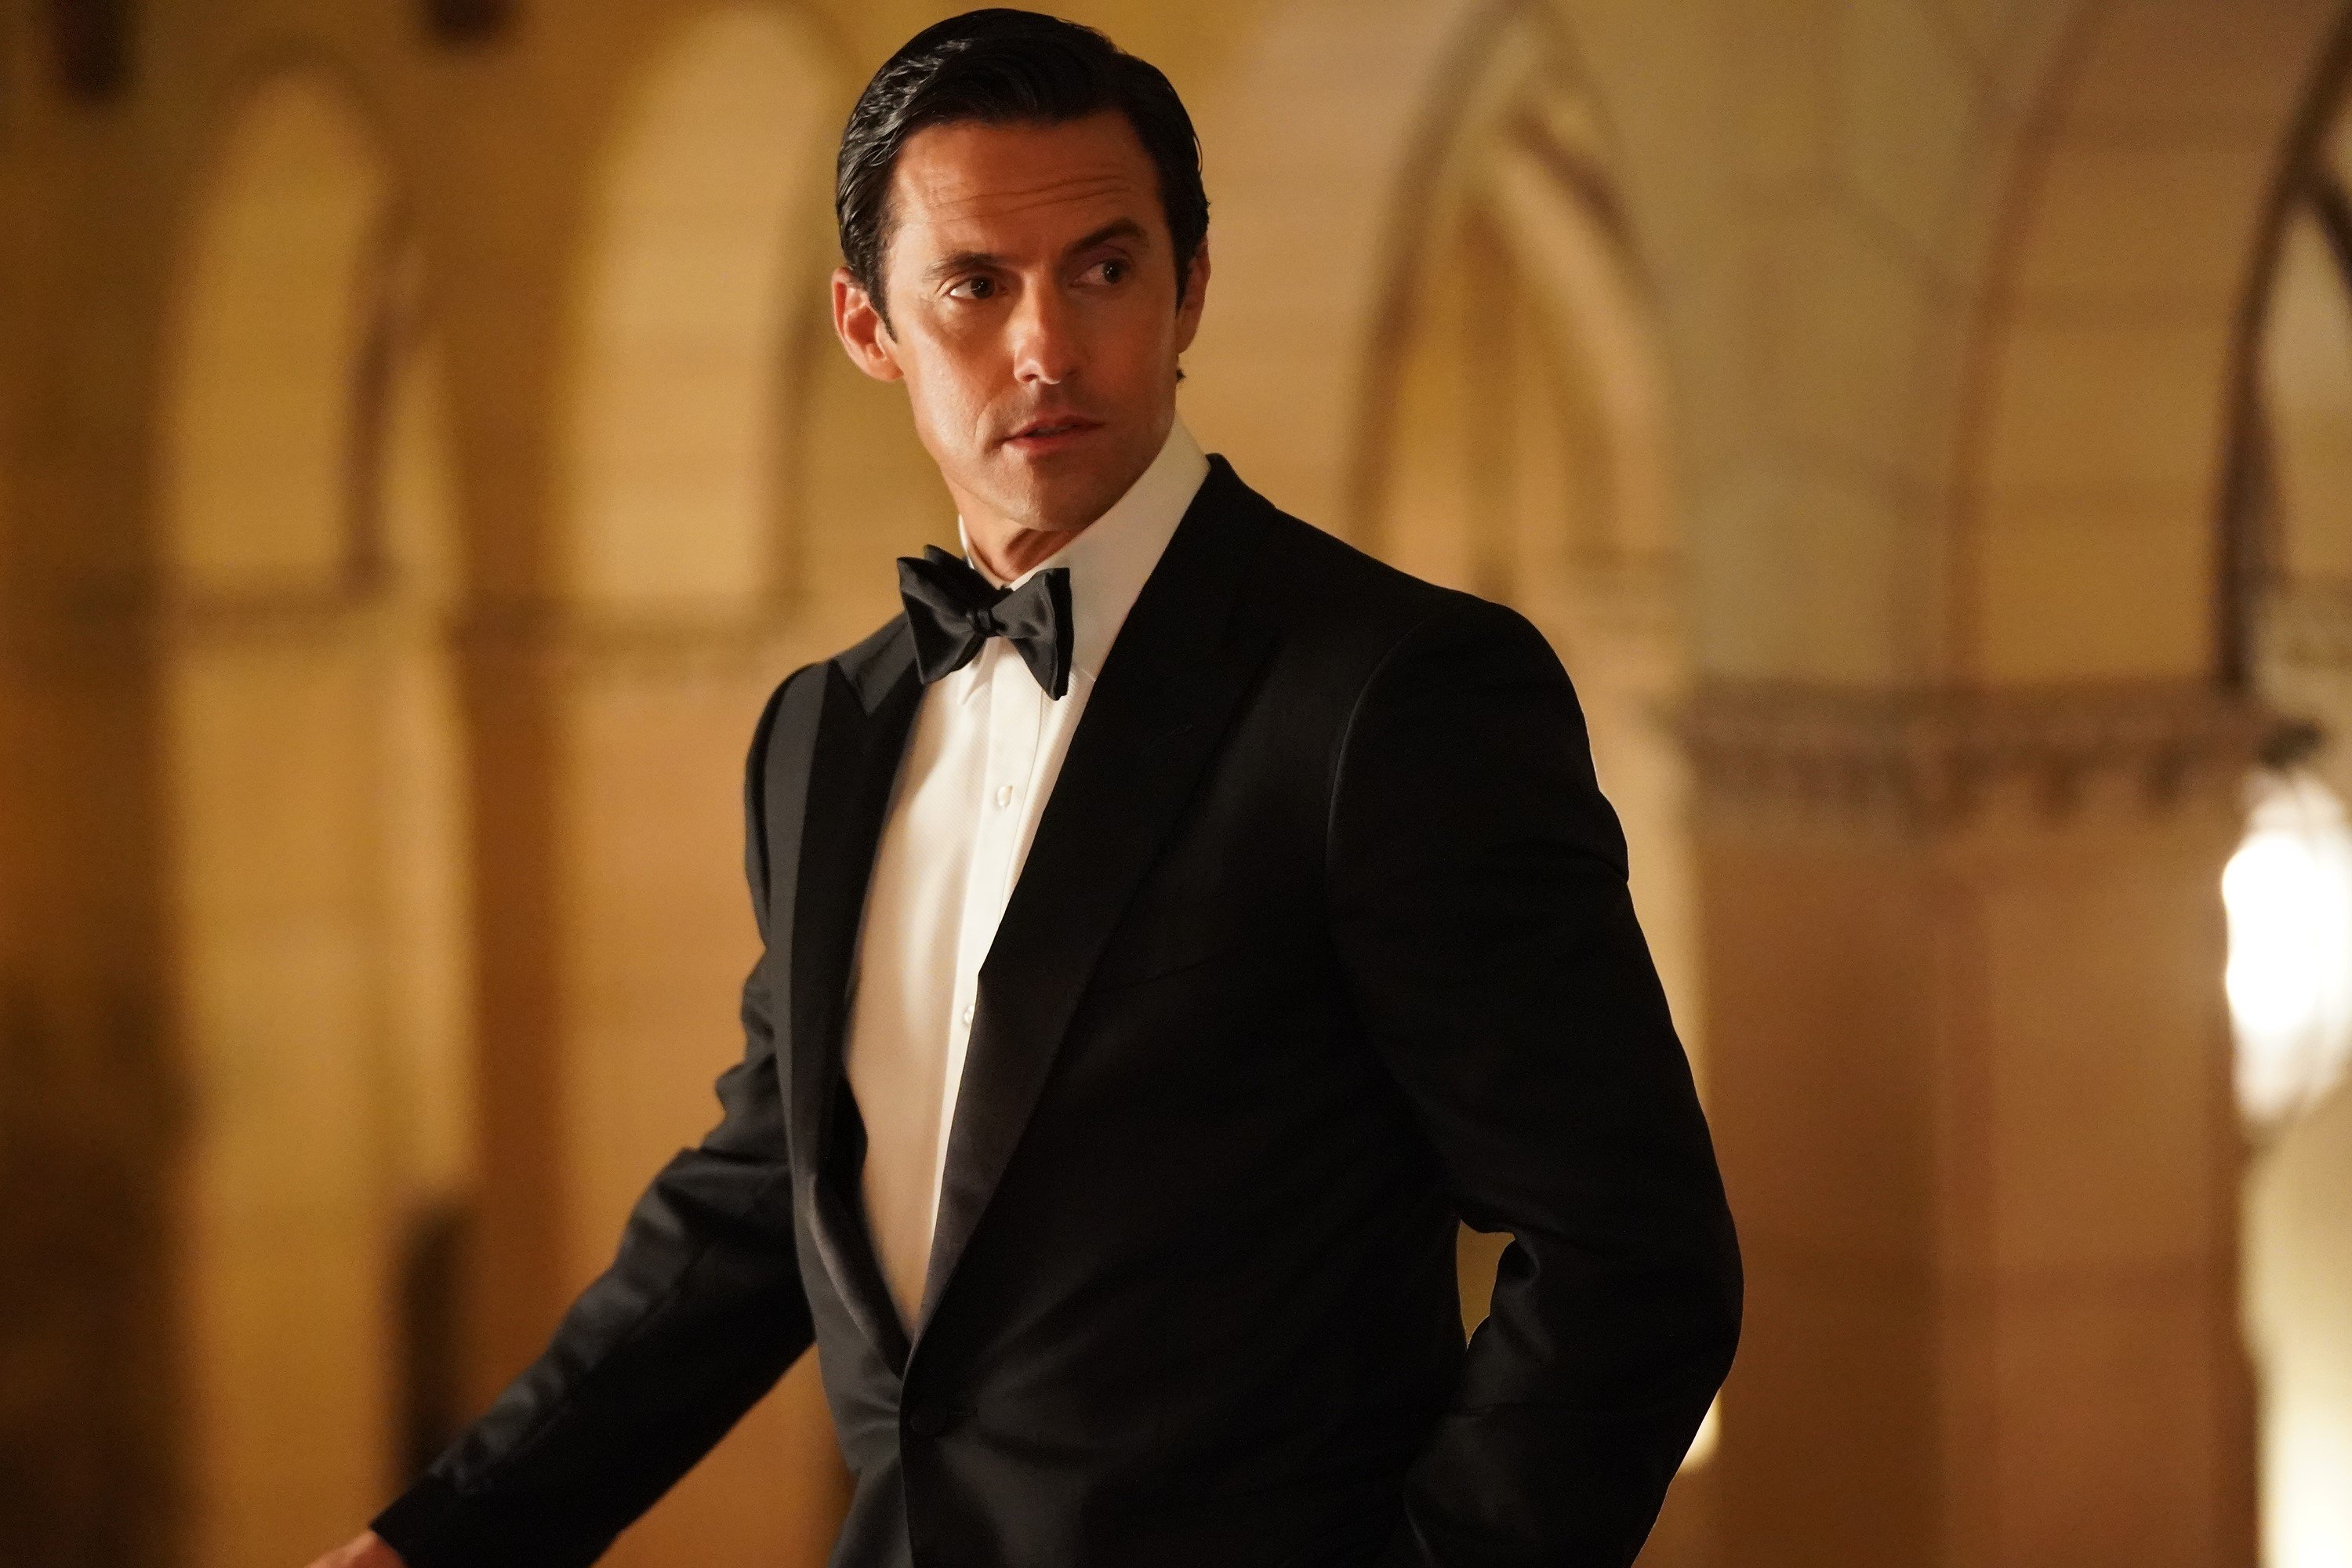 Milo Ventimiglia, who stars as Charlie Nicoletti in 'The Company You Keep cast, wears a black and white tux.